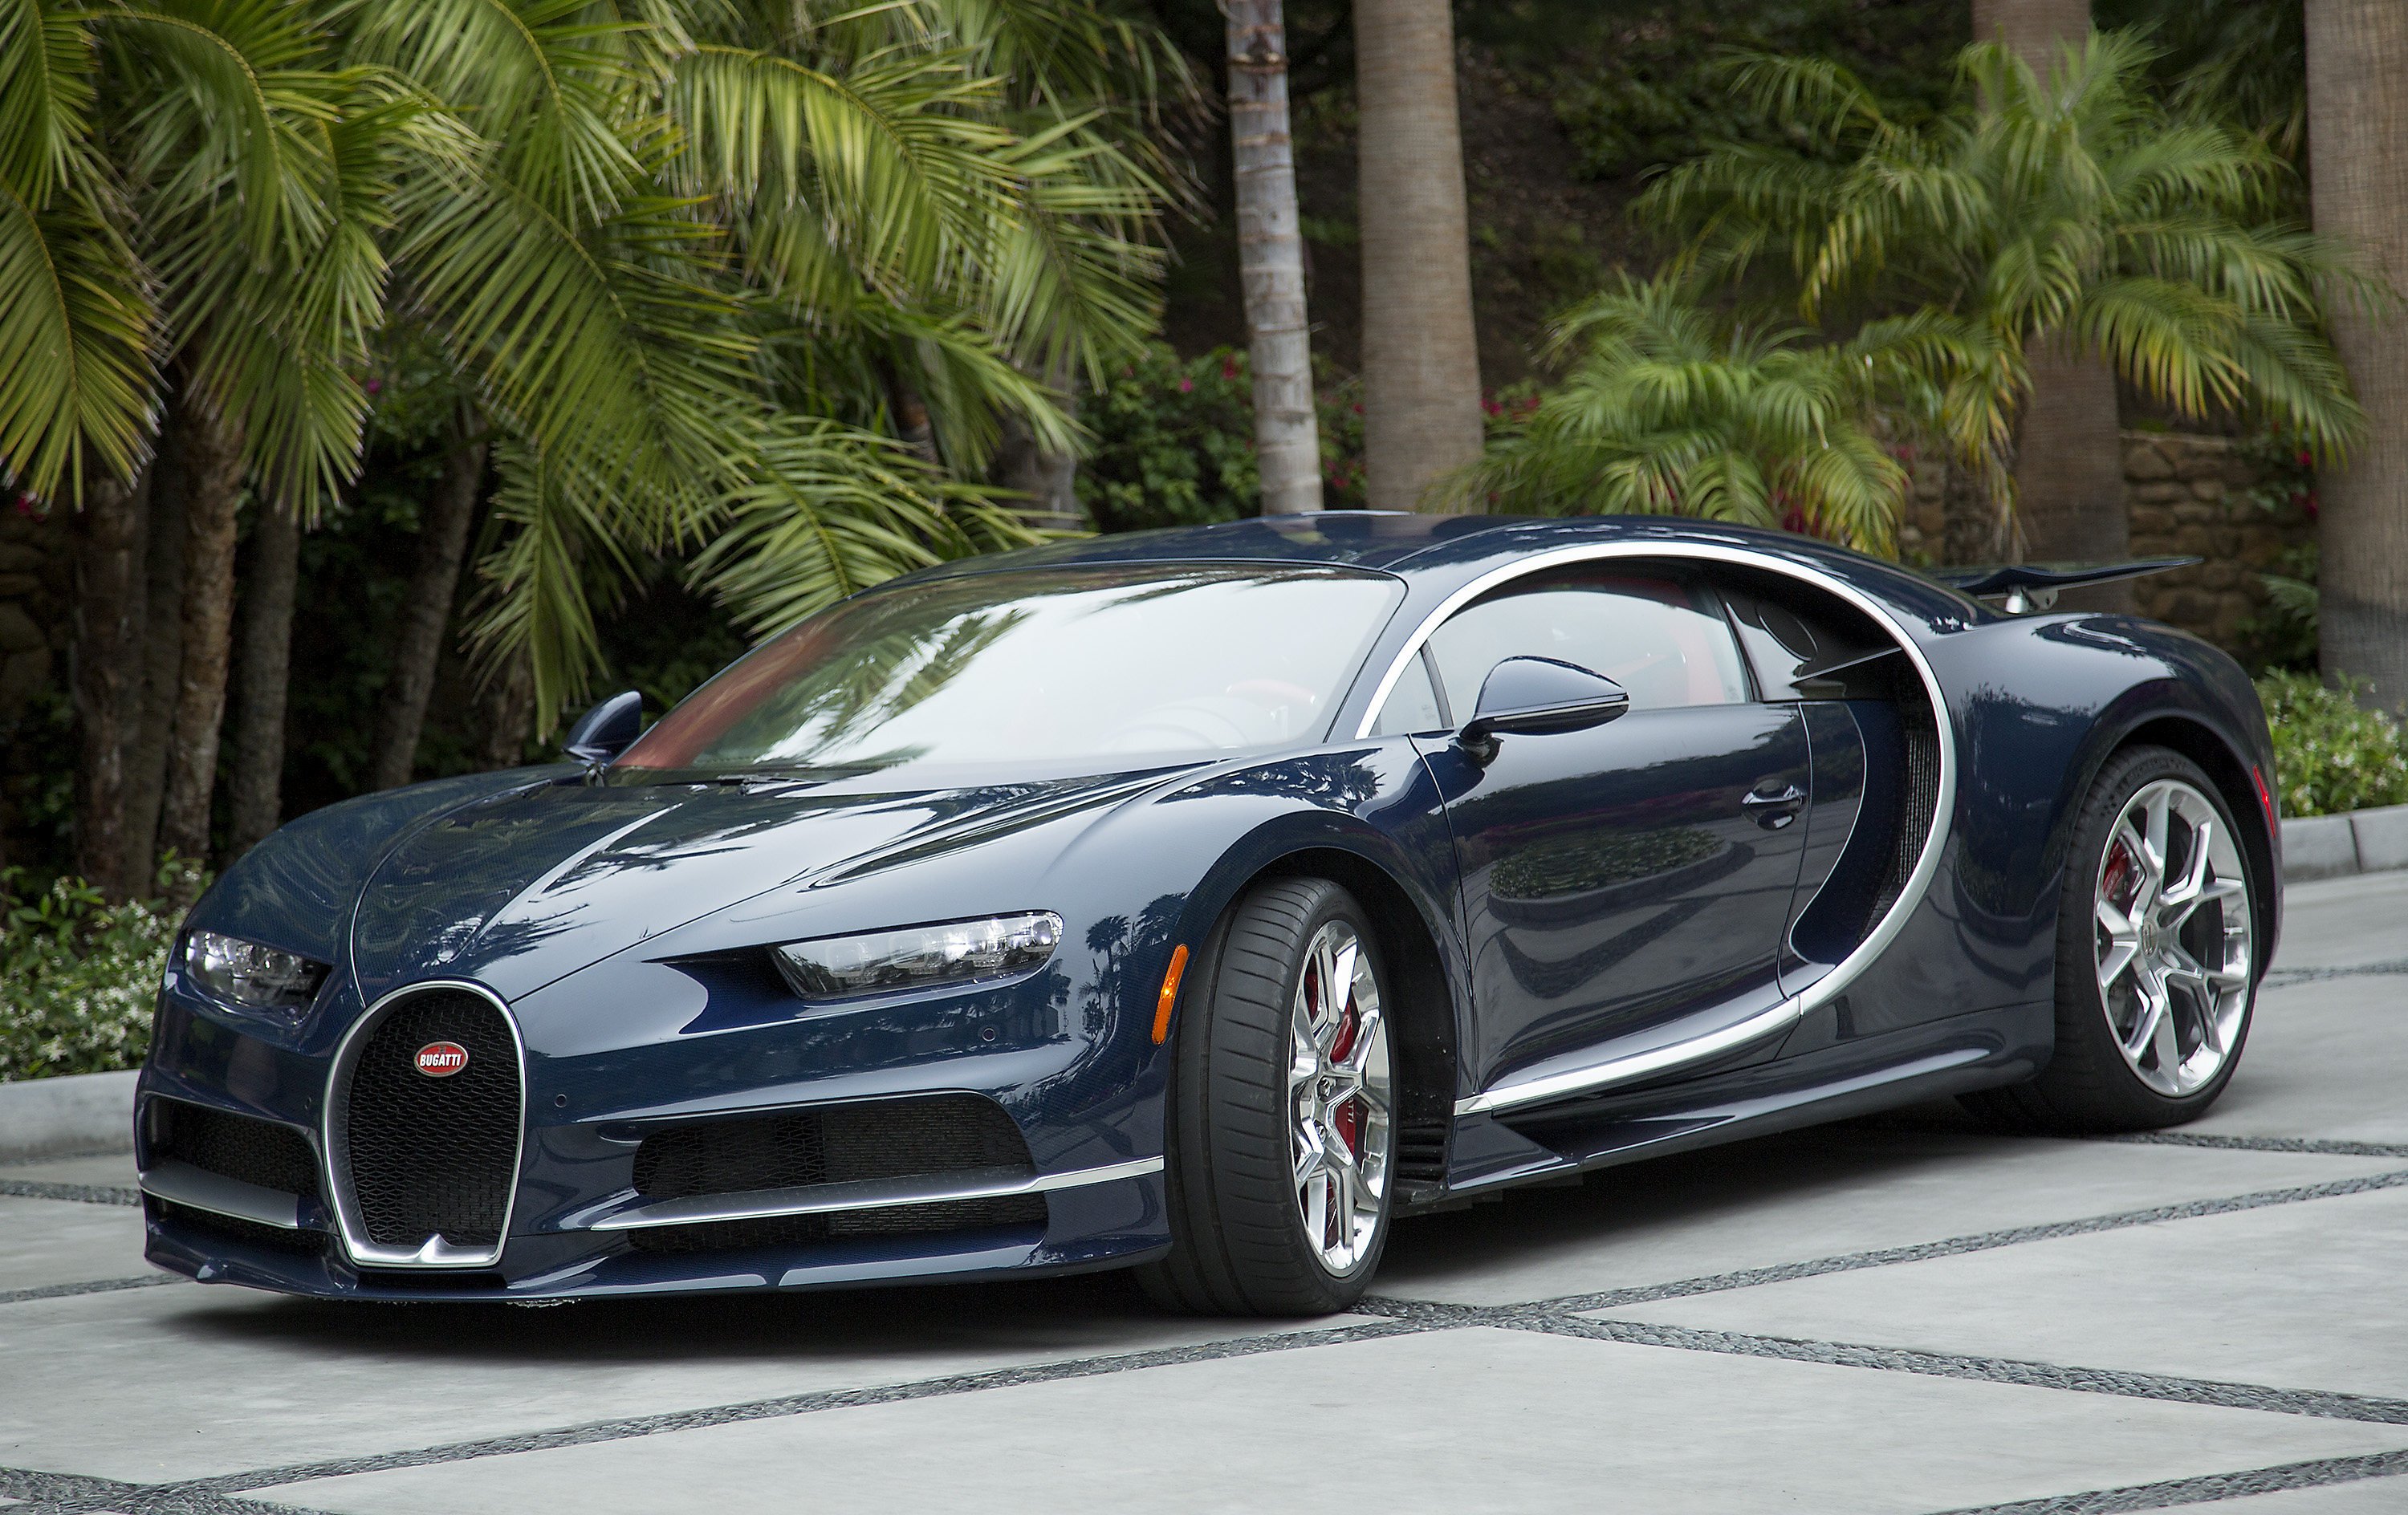 The Bugatti Chiron is a 1,500-horsepower luxury supercar – and the brand’s “entry level” vehicle. Photo: Los Angeles Times/TNS